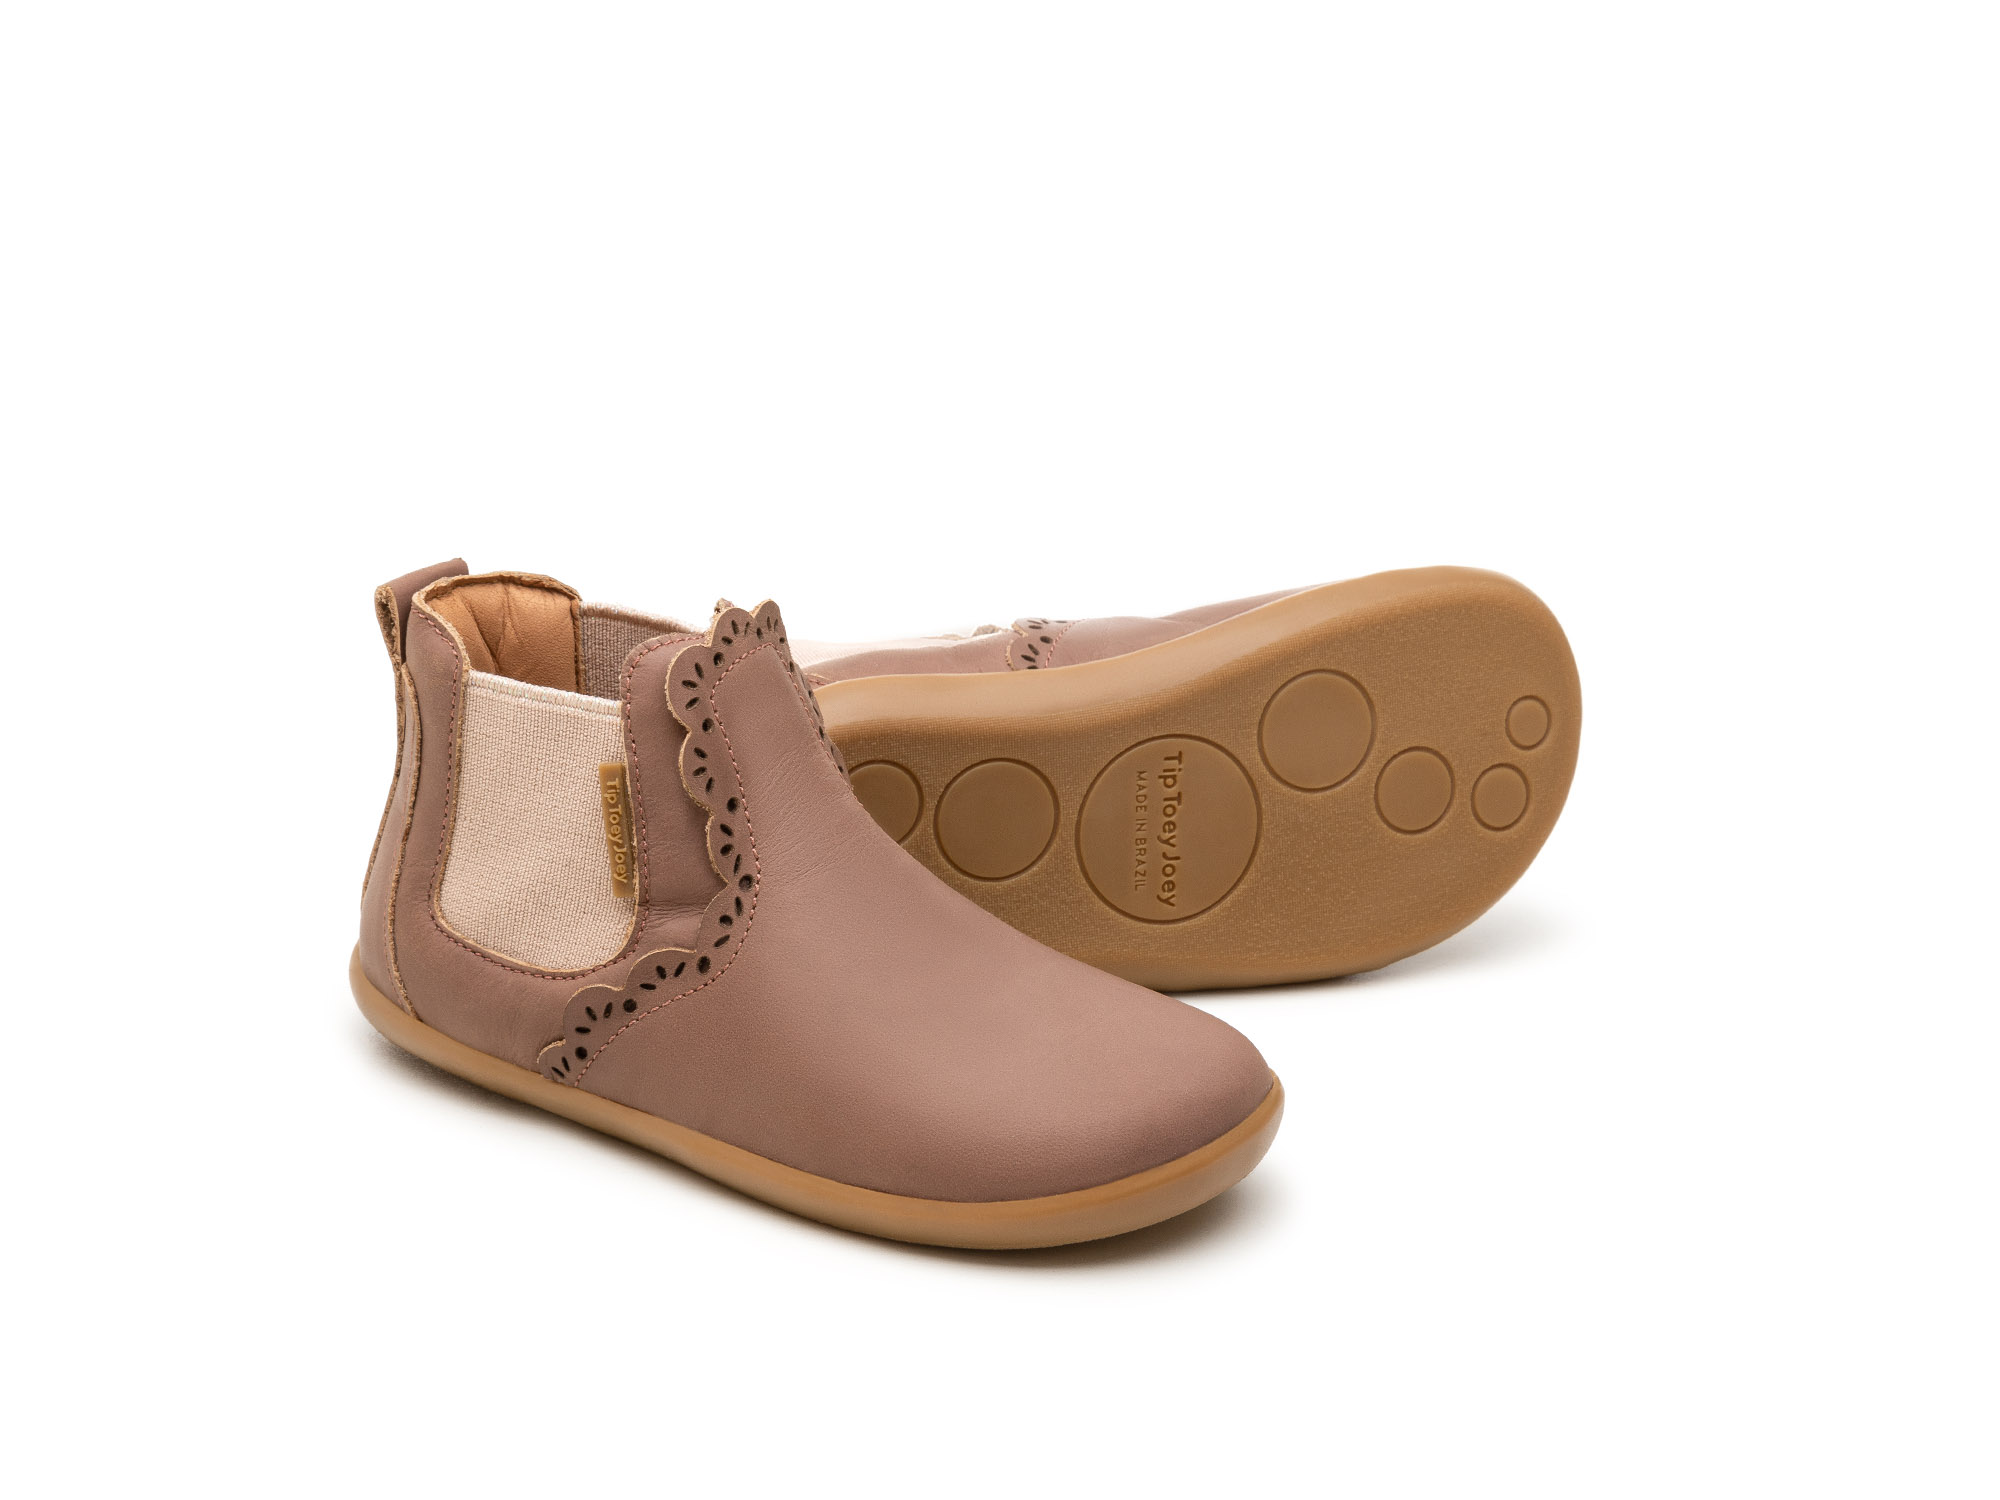 RUN & PLAY Boots for Girls Little Lace | Tip Toey Joey - Australia - 1